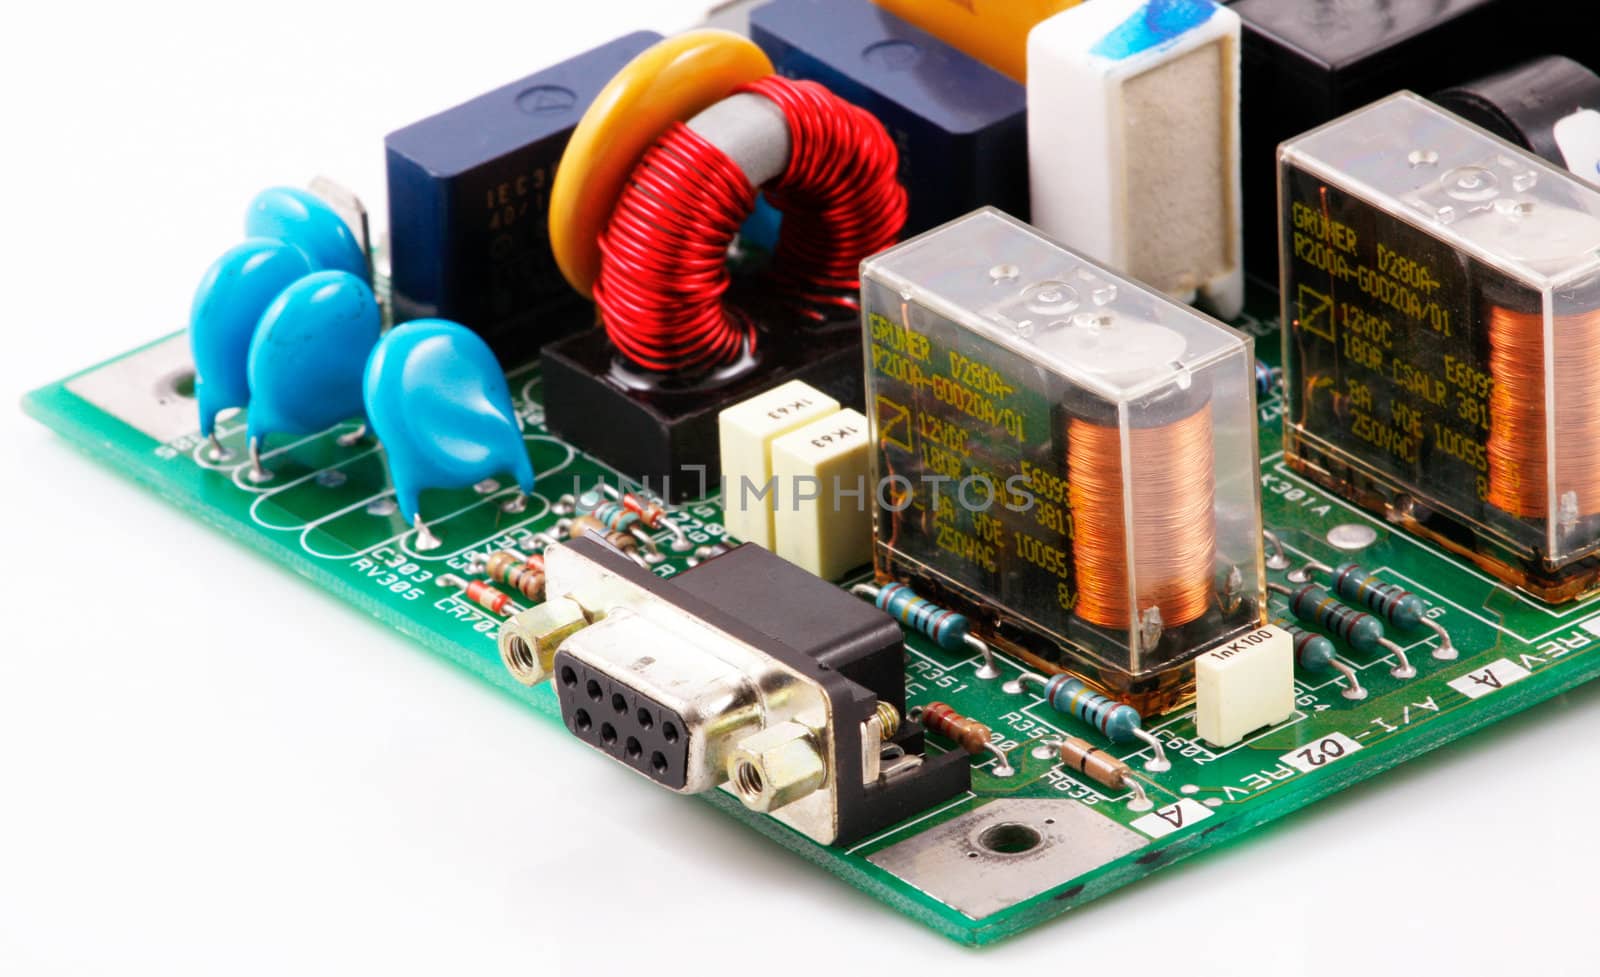 Image of computer hardware & components